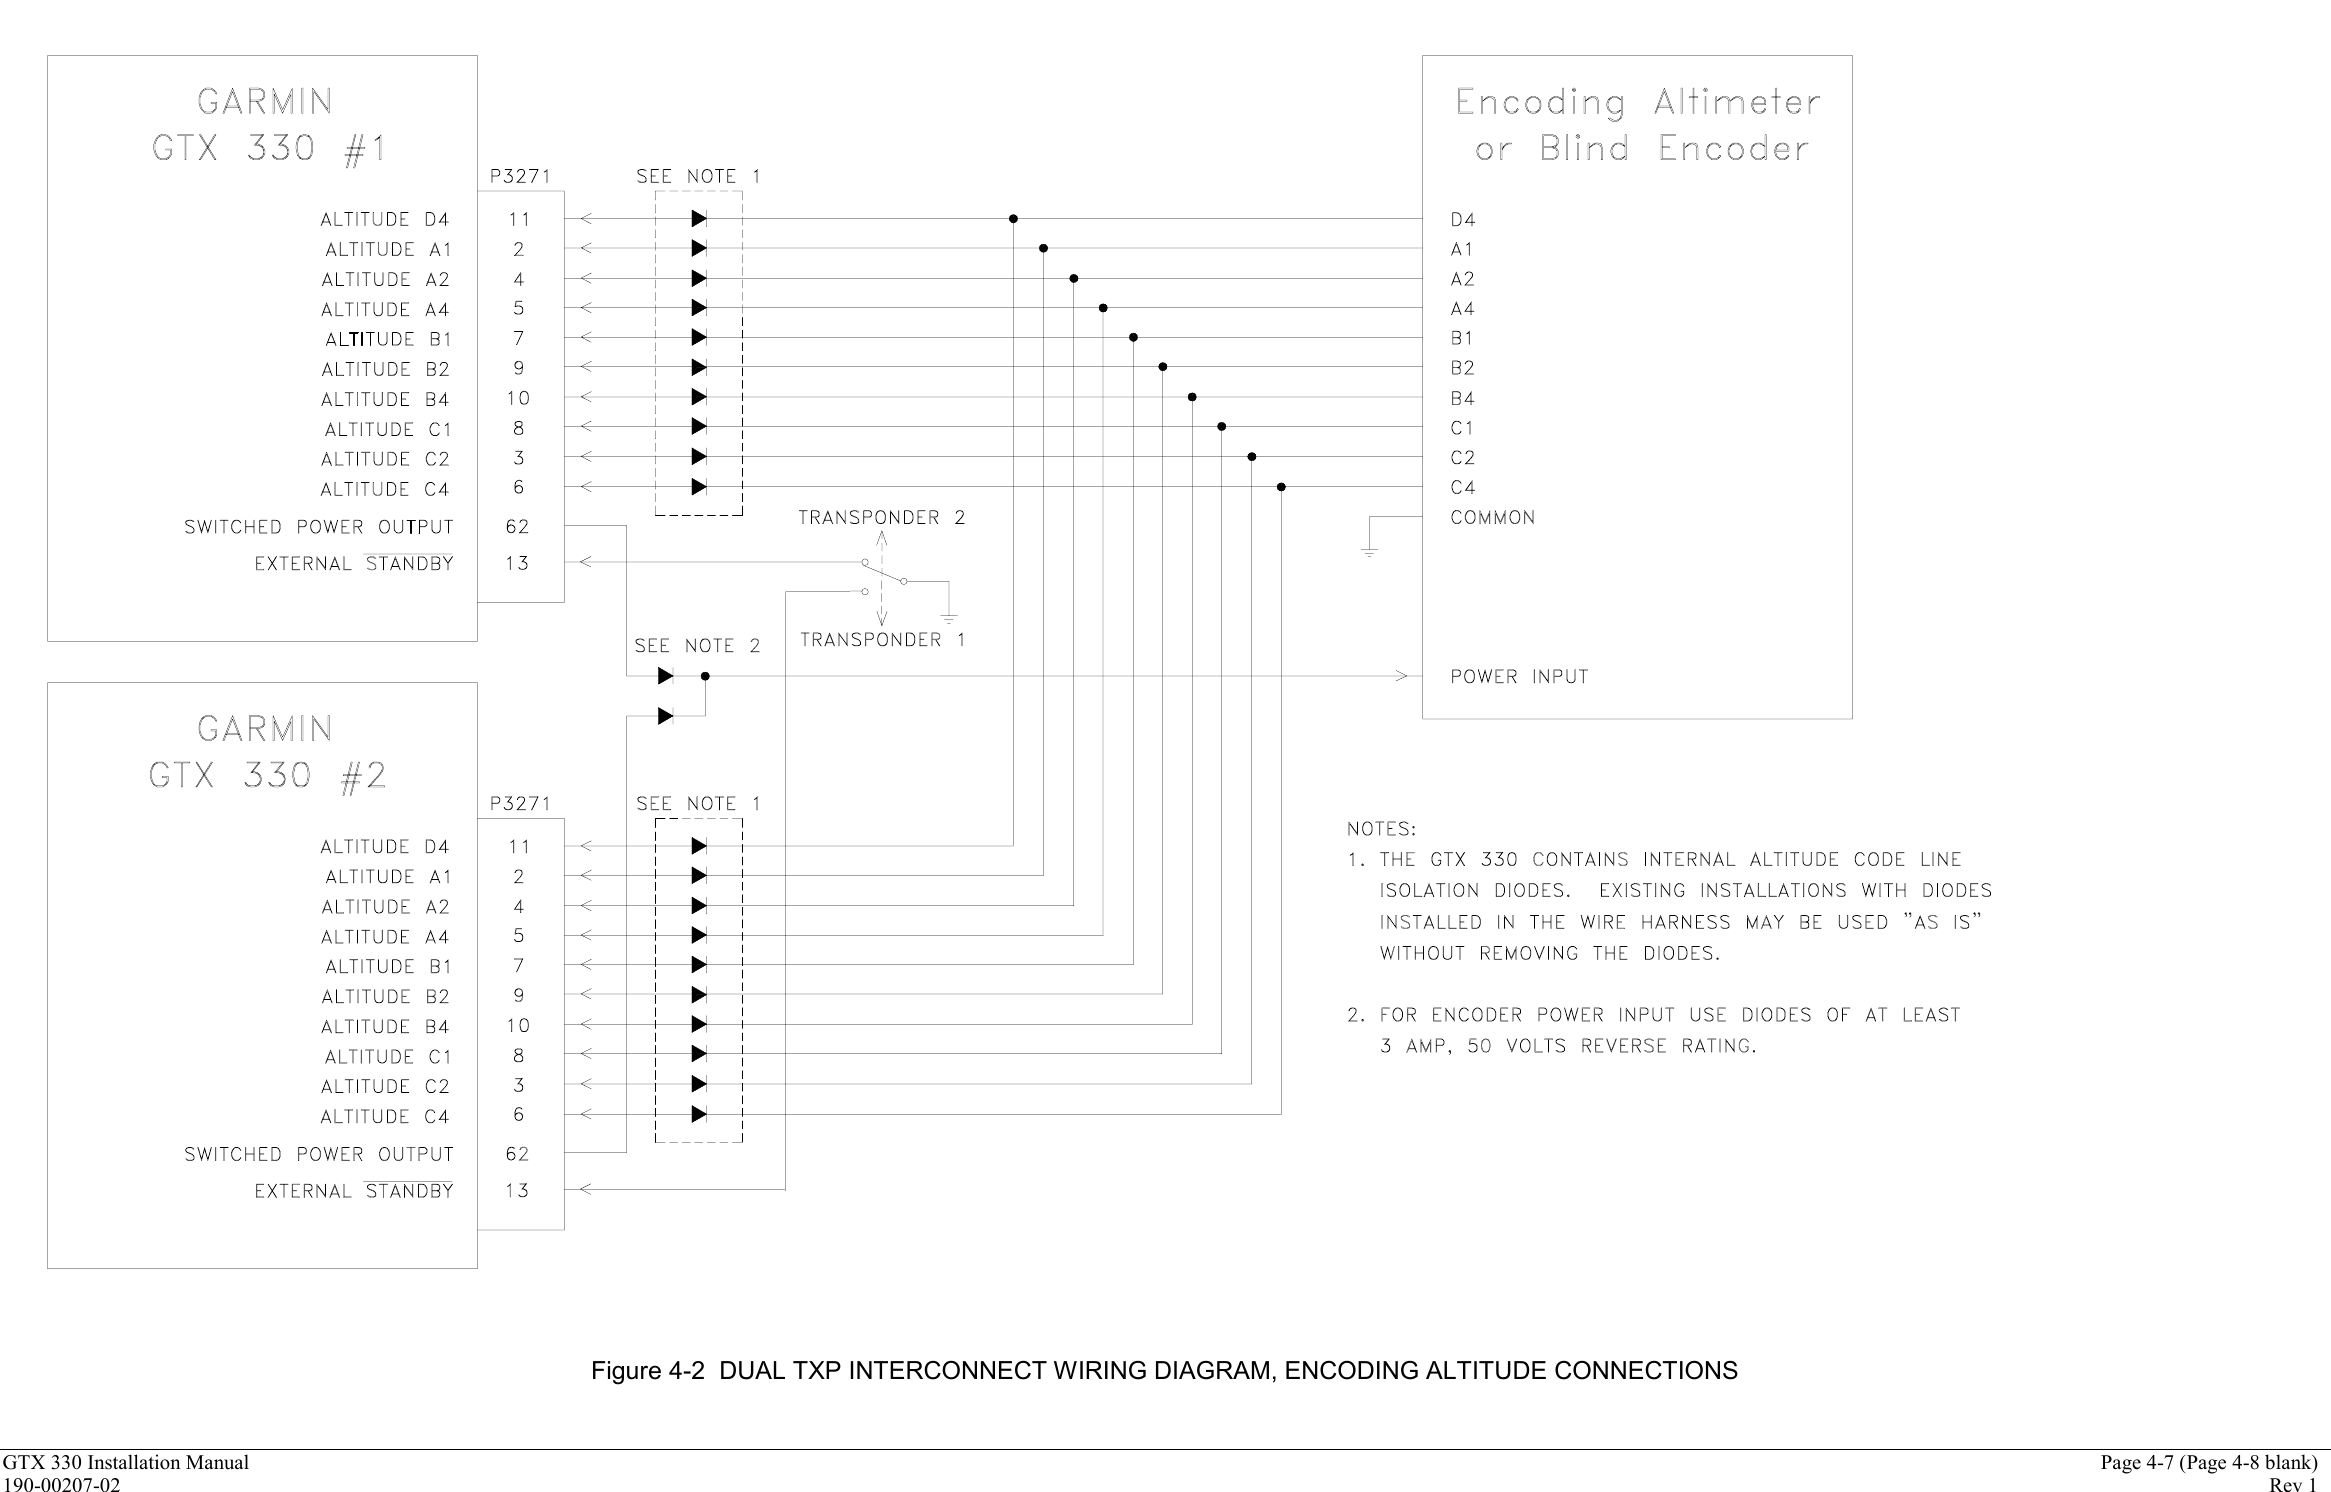 GTX 330 Installation Manual Page 4-7 (Page 4-8 blank)190-00207-02 Rev 1Figure 4-2  DUAL TXP INTERCONNECT WIRING DIAGRAM, ENCODING ALTITUDE CONNECTIONS